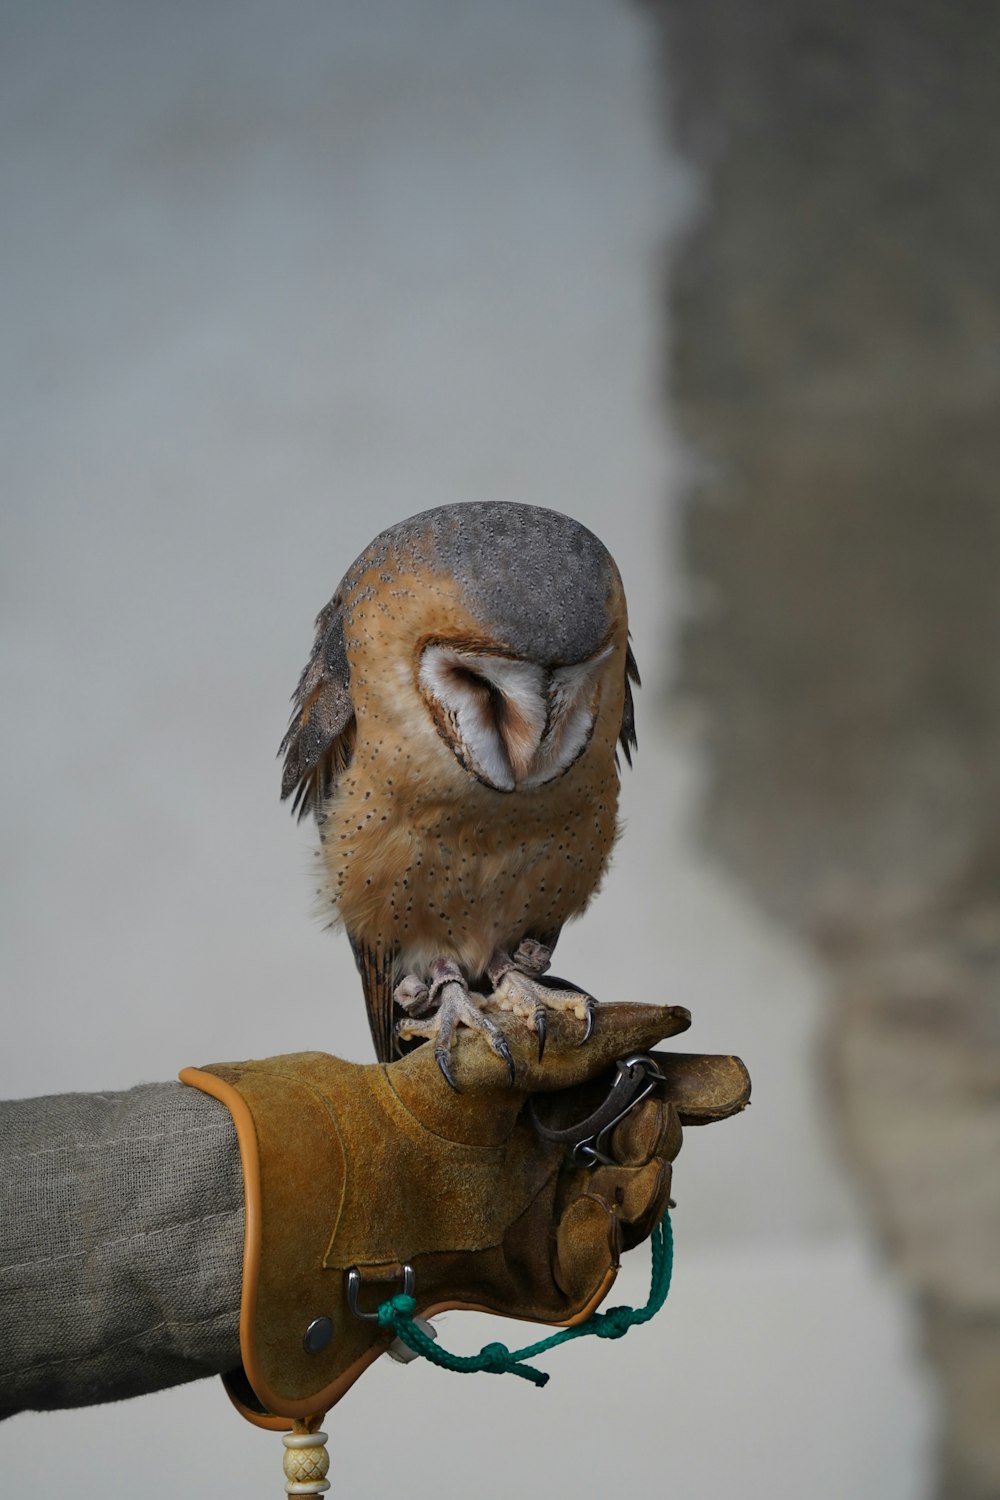 a small bird perched on top of a glove